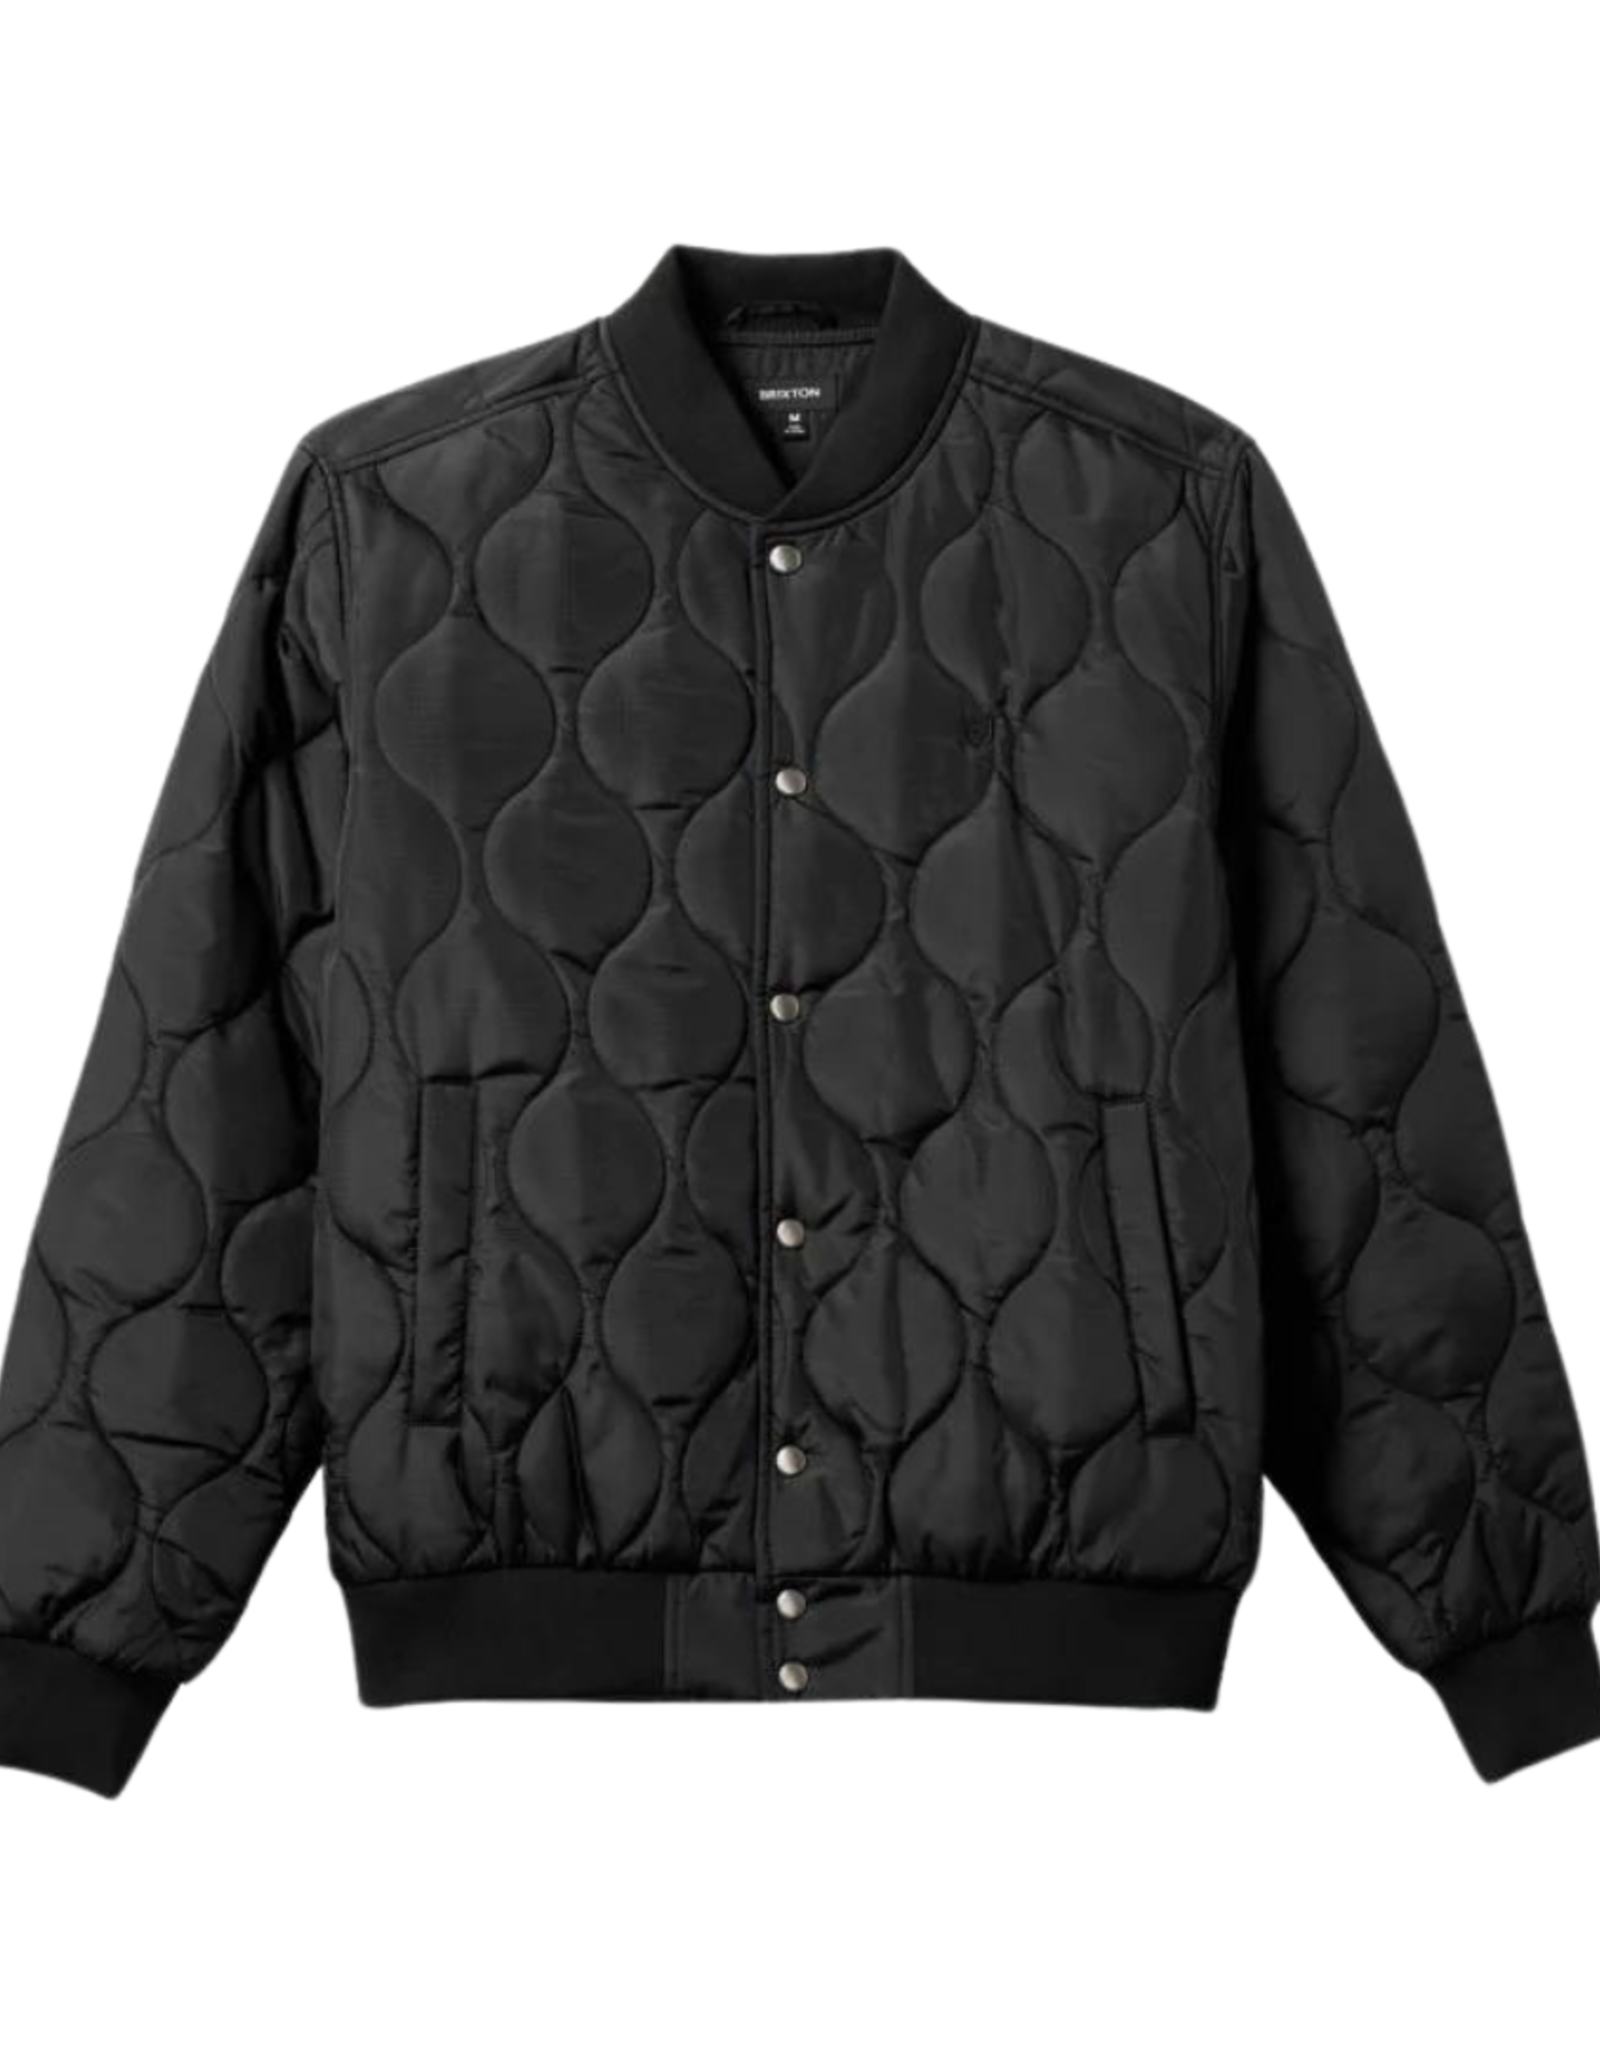 BRIXTON BRIXTON - DILLINGER QUILTED BOMBER JACKET